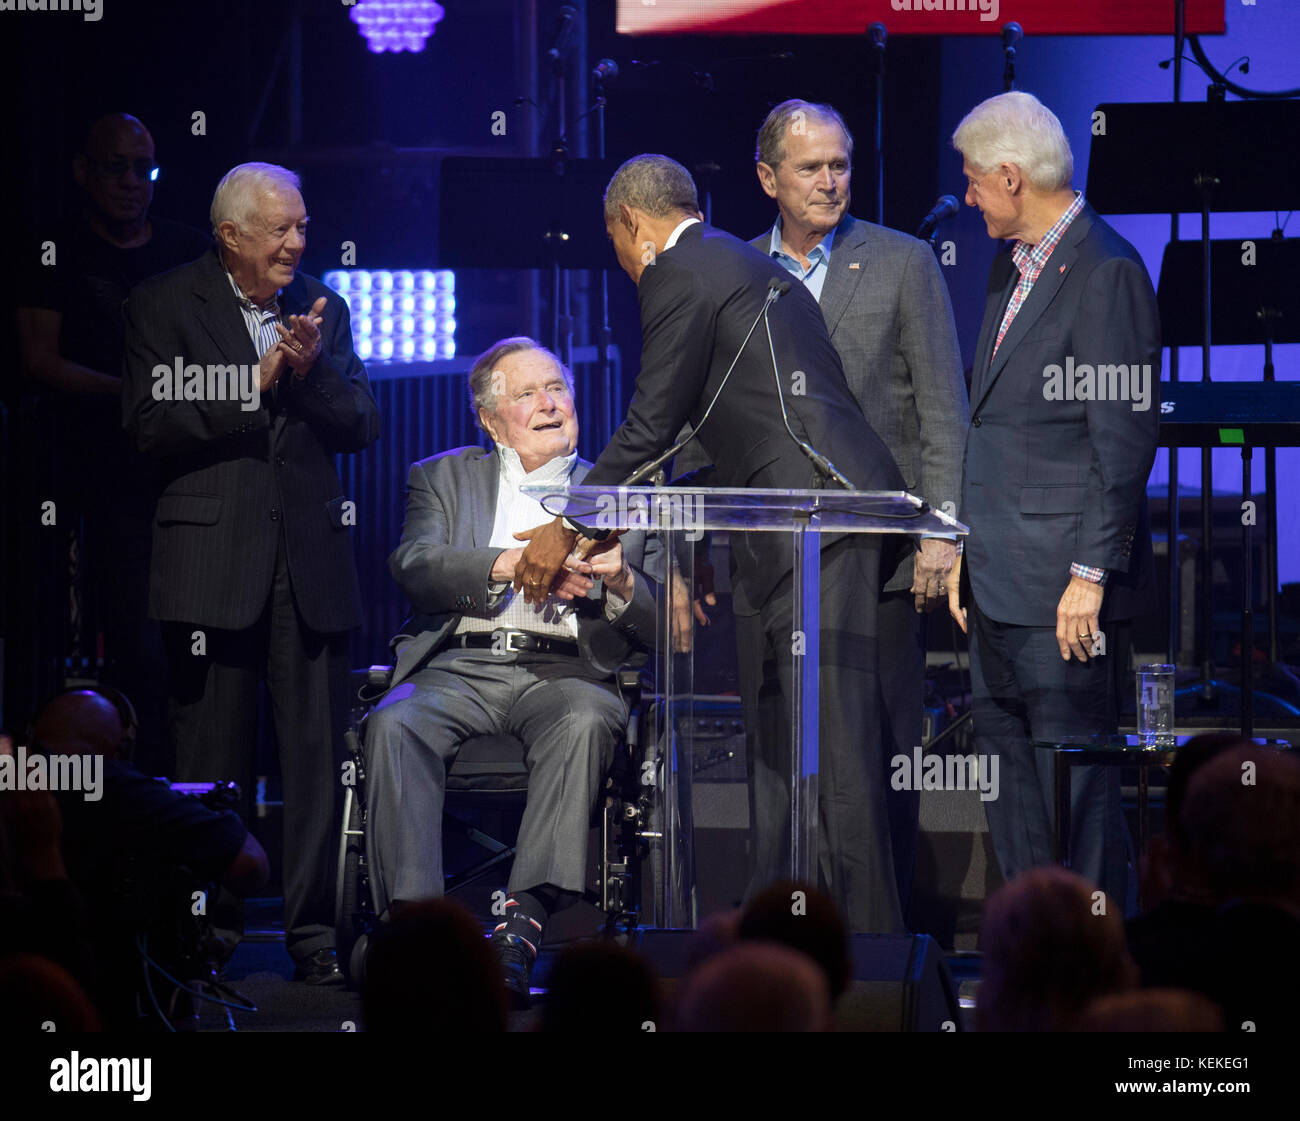 College Station, Texas USA Oct. 21, 2017: The five living former U.S. Presidents onstage at Texas A&M University's Reed Arena for a One America Response concert and fund raiser for hurricane and storm relief. Left to right, former presidents Jimmy Carter, George H.W. Bush, Barack Obama, George W. Bush, and Bill Clinton appear midway in the concert. Credit: Bob Daemmrich/Alamy Live News Stock Photo